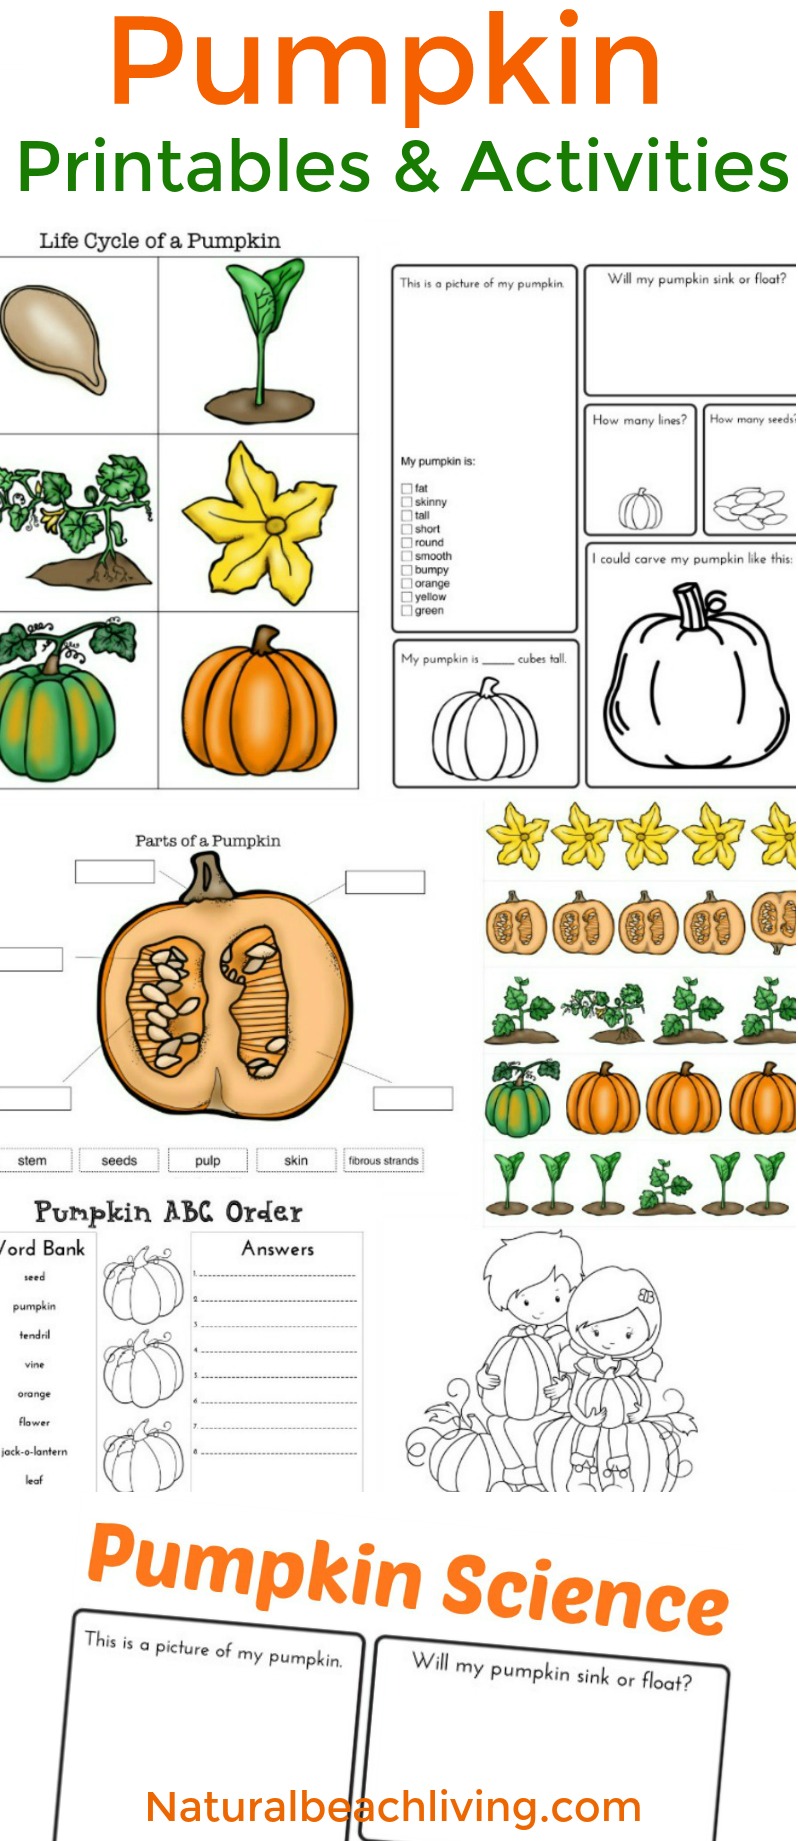 200+ Halloween Activities for Kids, Halloween Crafts for Kids, Halloween Snacks and party food, Halloween Slime Recipes and Halloween Sensory Bins, You'll find Halloween Party Ideas, printables, no carve pumpkin ideas, and everything you need to have fun on Halloween. 